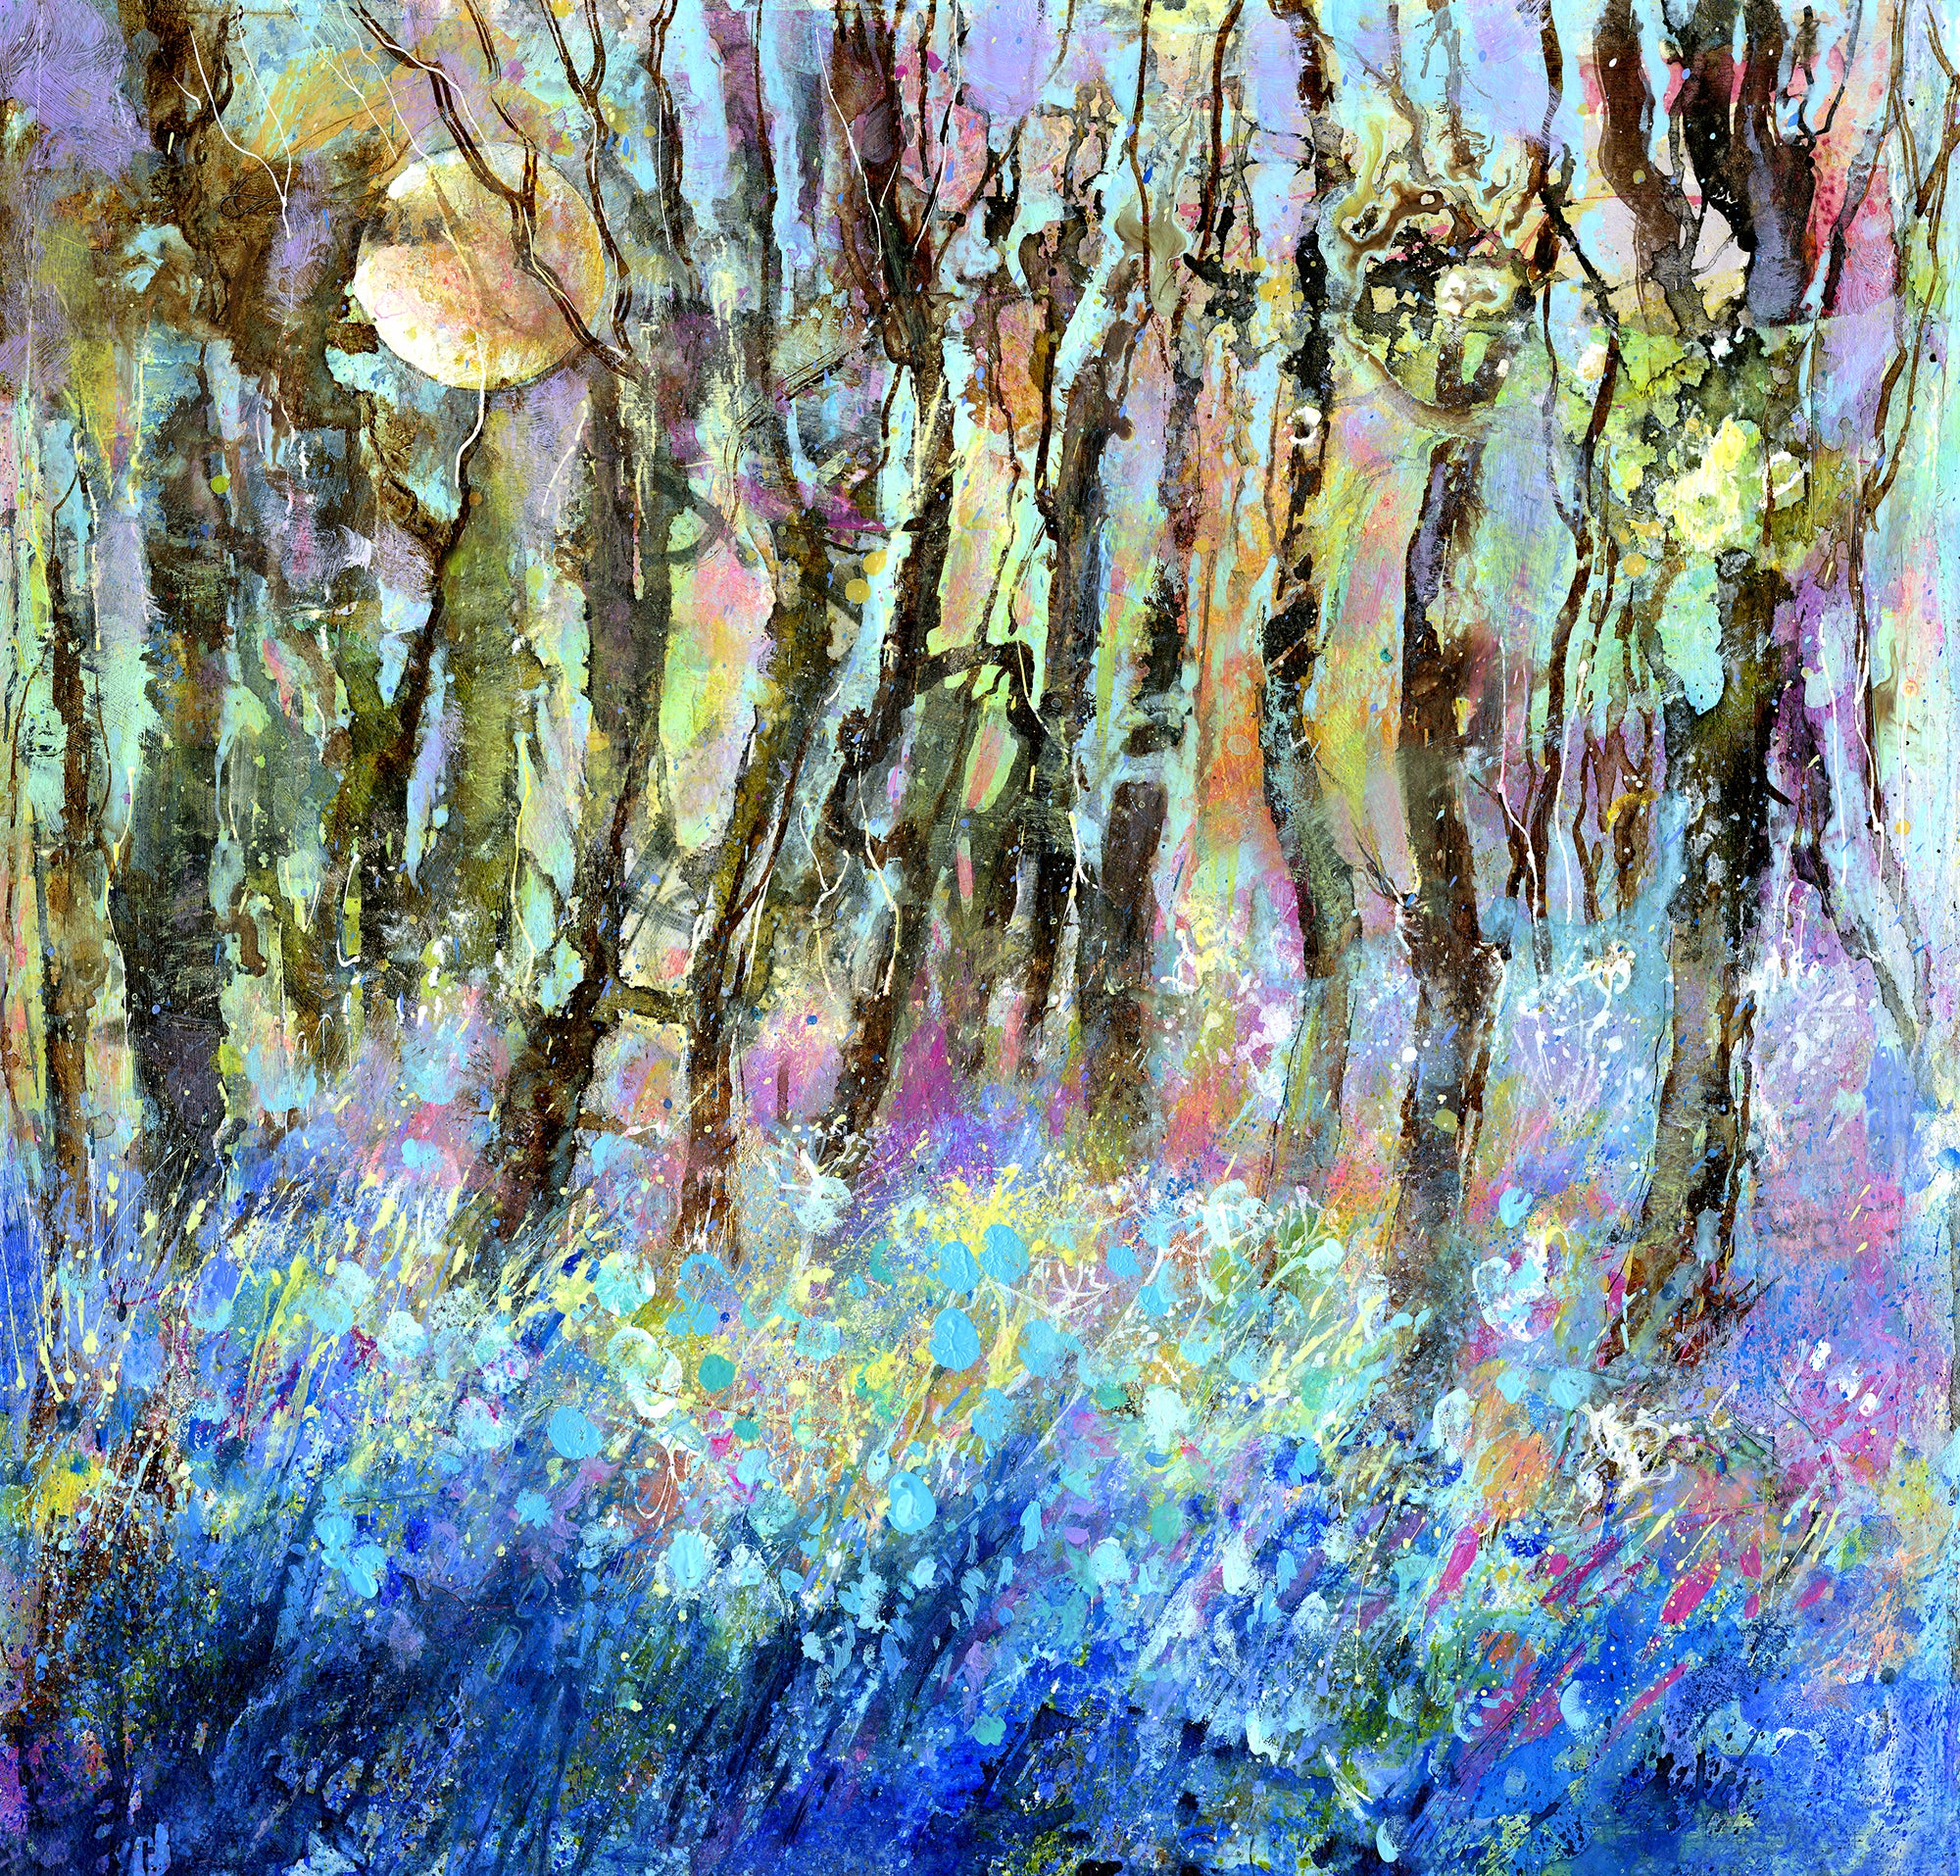 bluebells by moonlight semi abstract painting art work for the home artwork by Sheila Gill